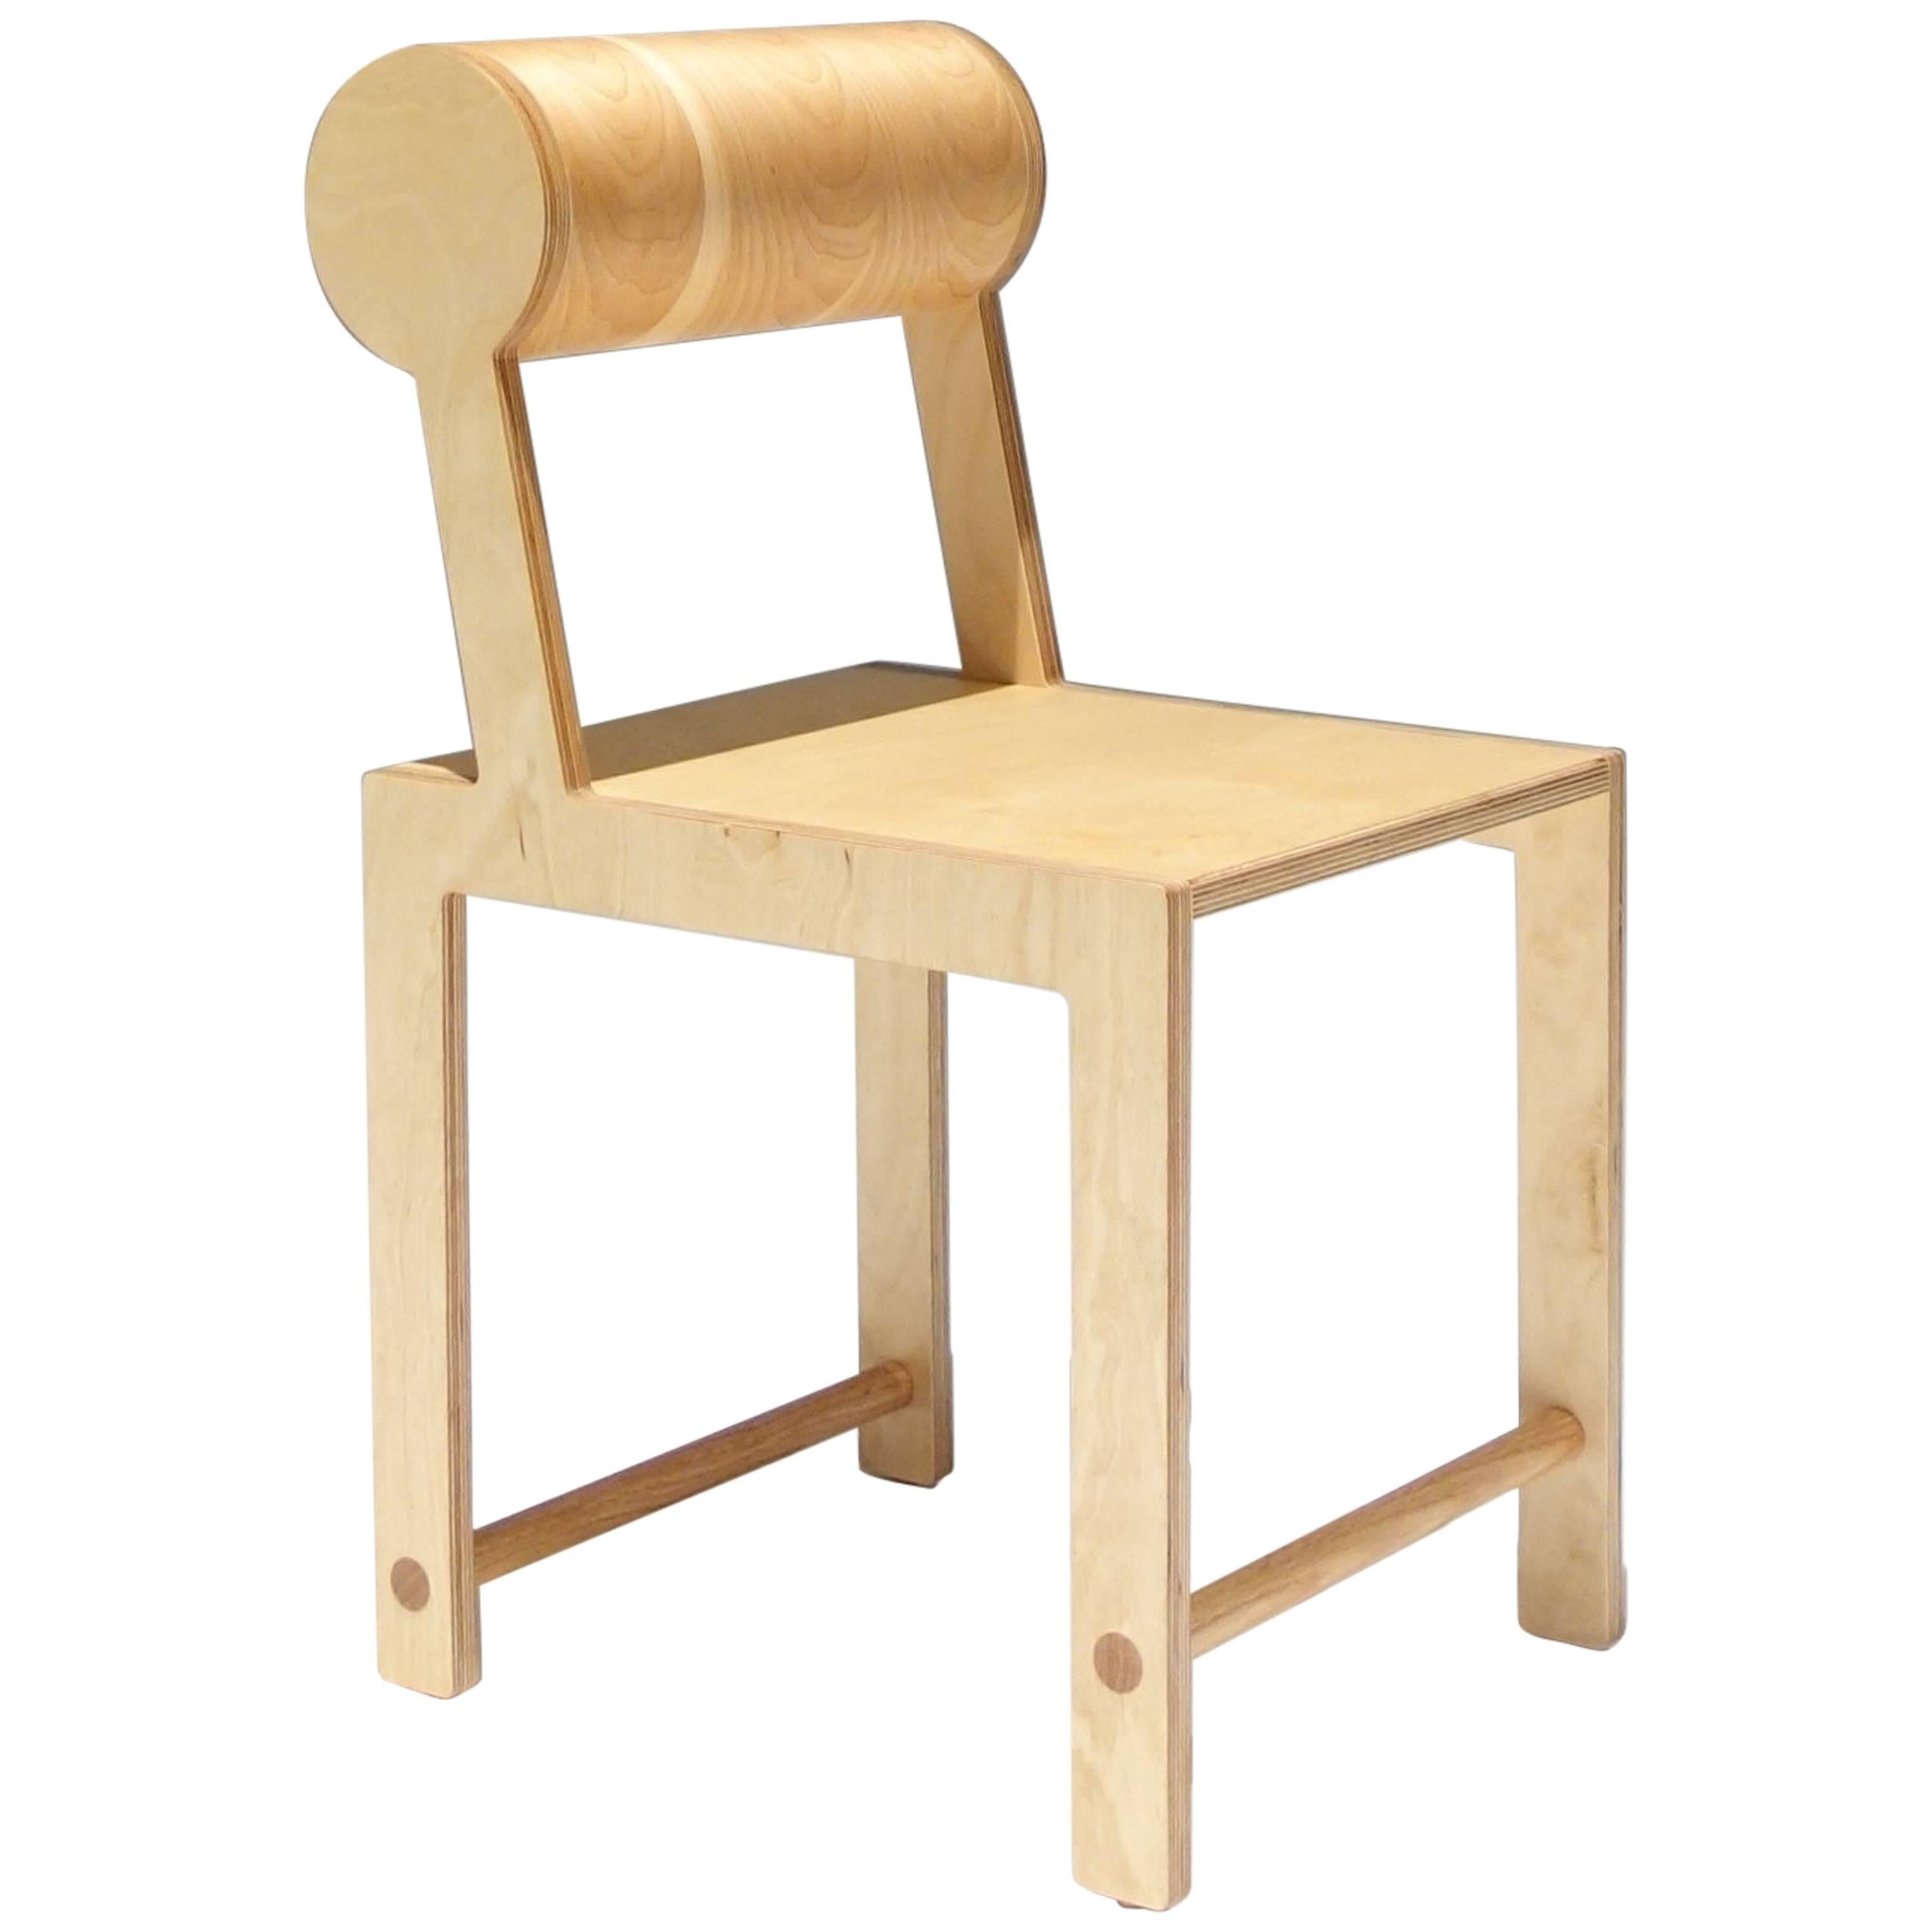 Waka Waka Contemporary Leaning Back Cylinder Wood Dining Chair